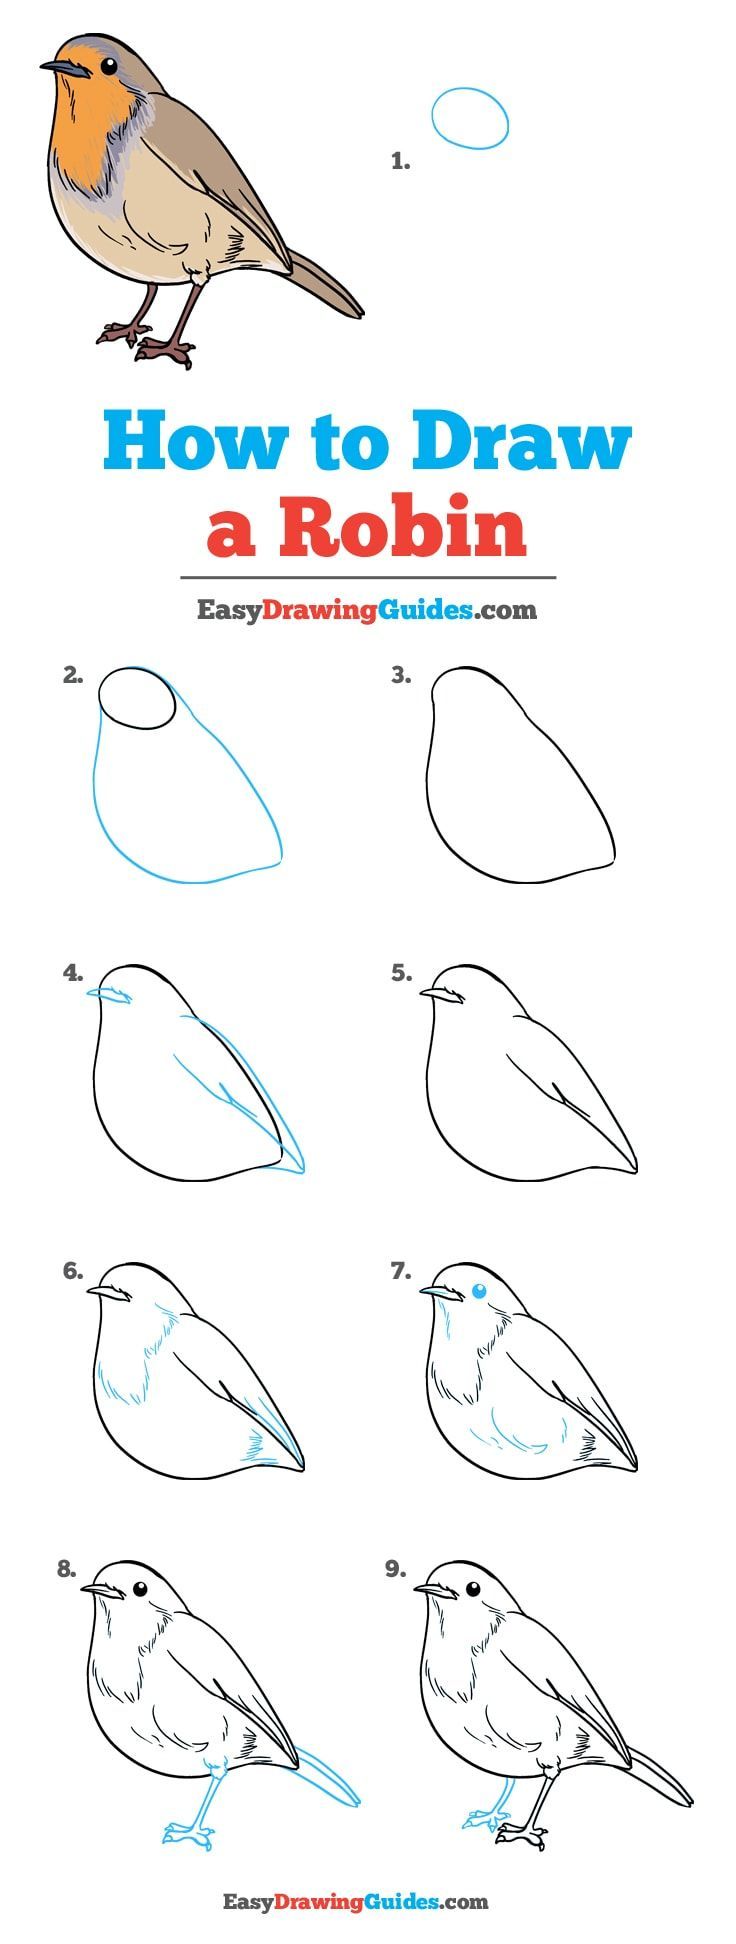 How To Draw A Robin - Really Easy Drawing Tutorial